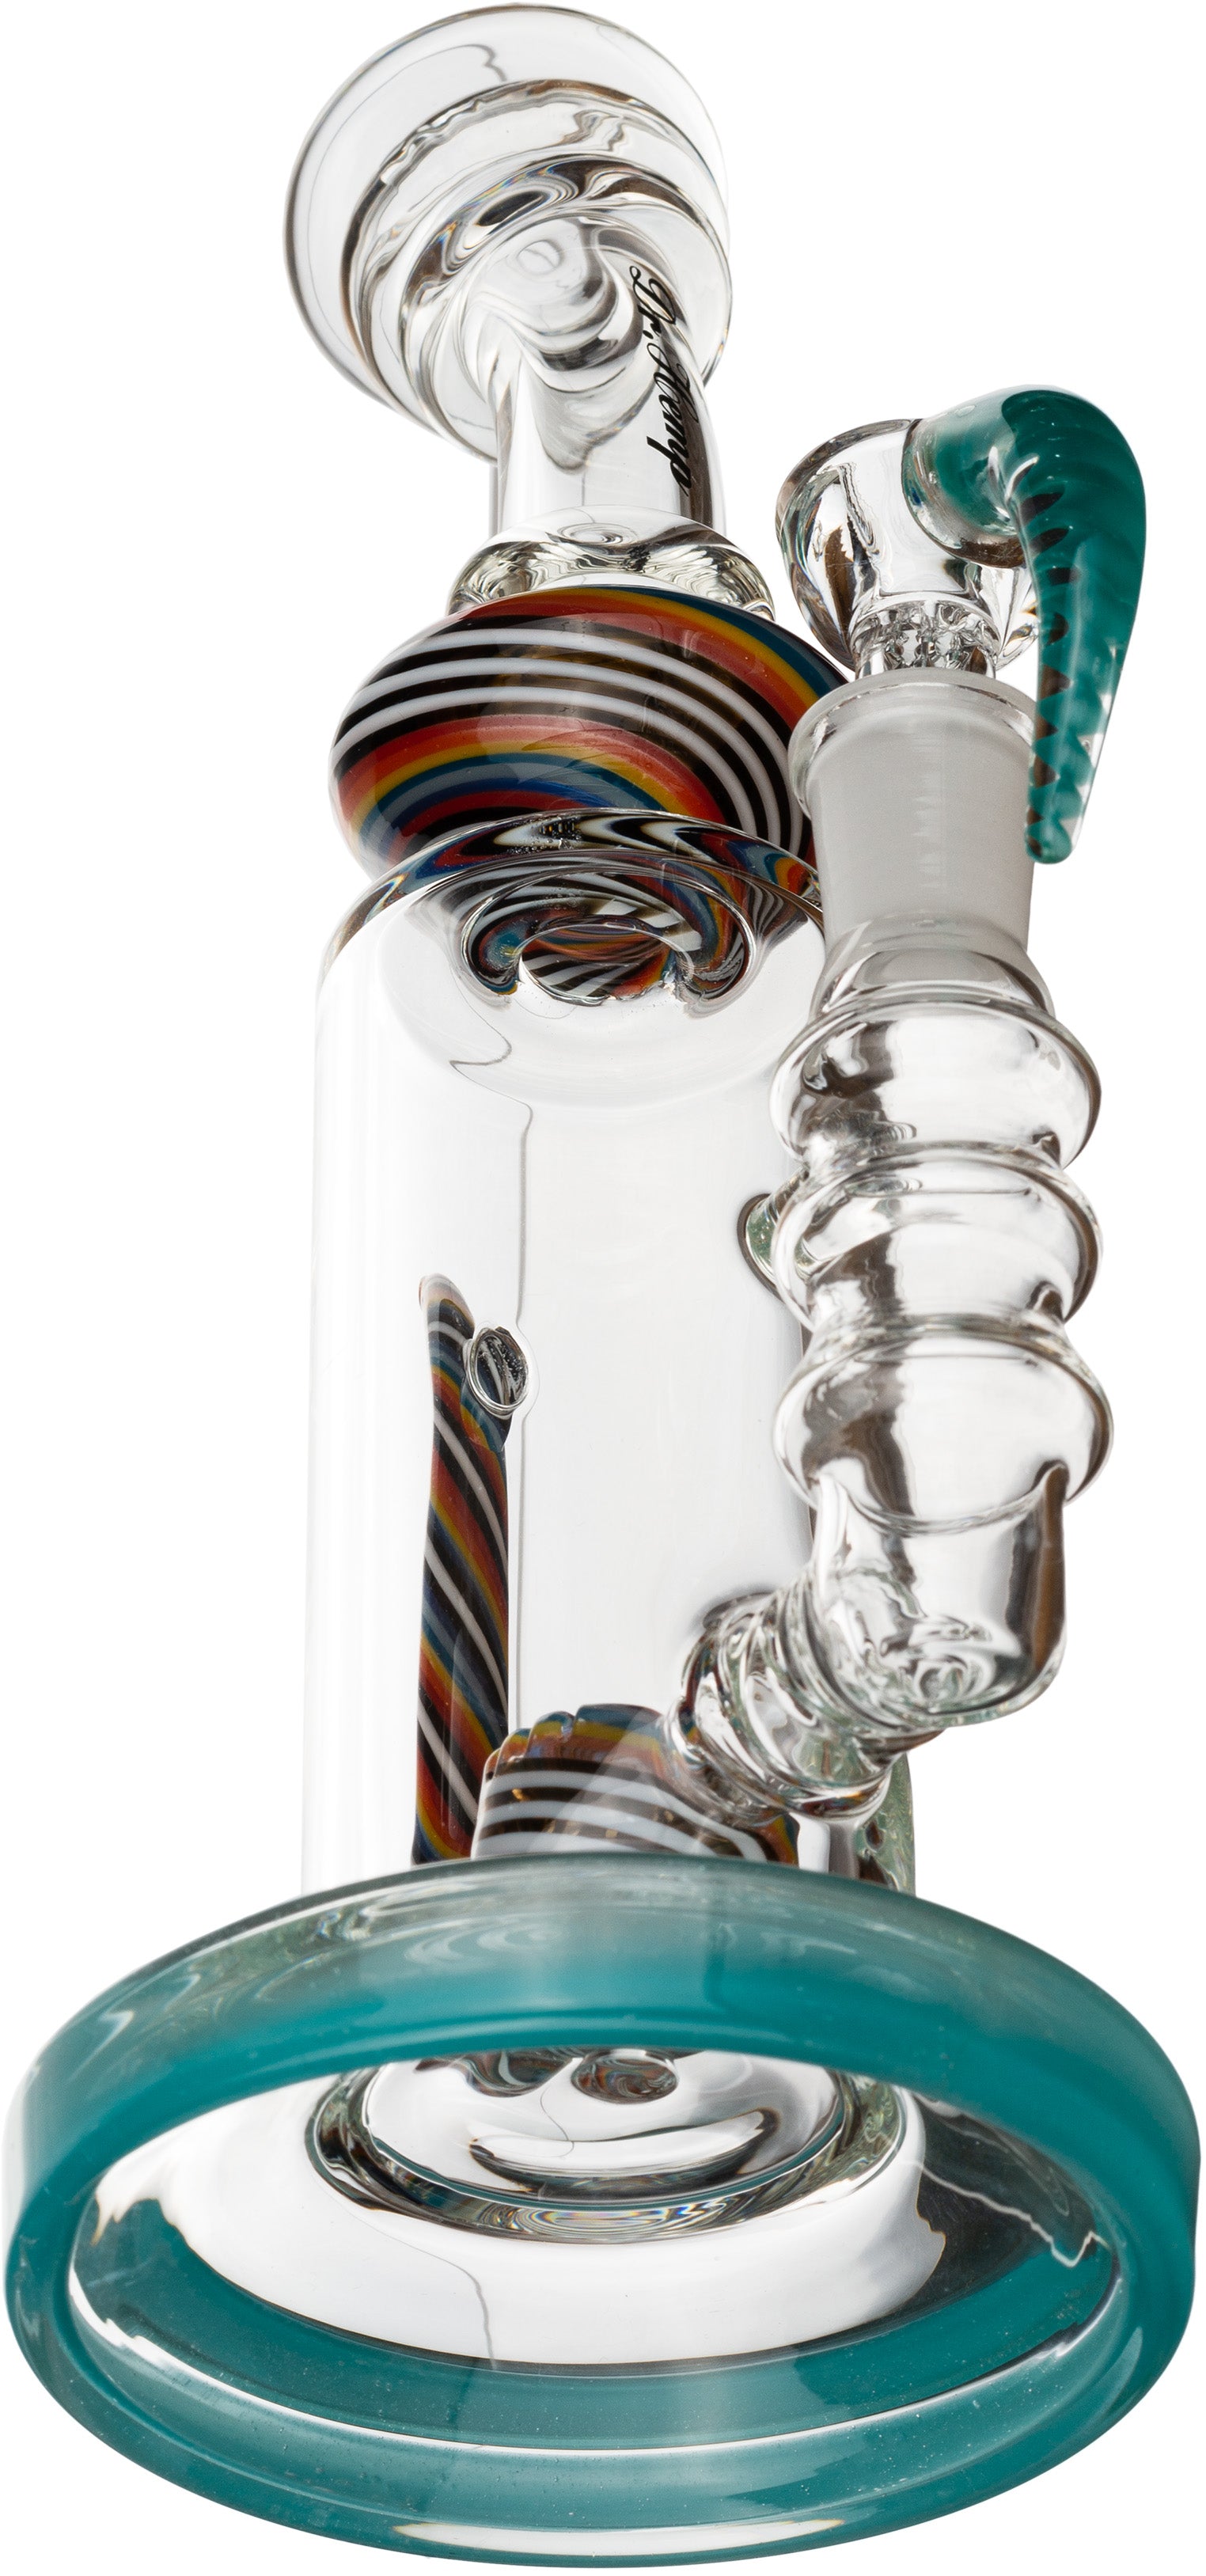 La Flame Rig All In One Kit, by Dr. Hemp